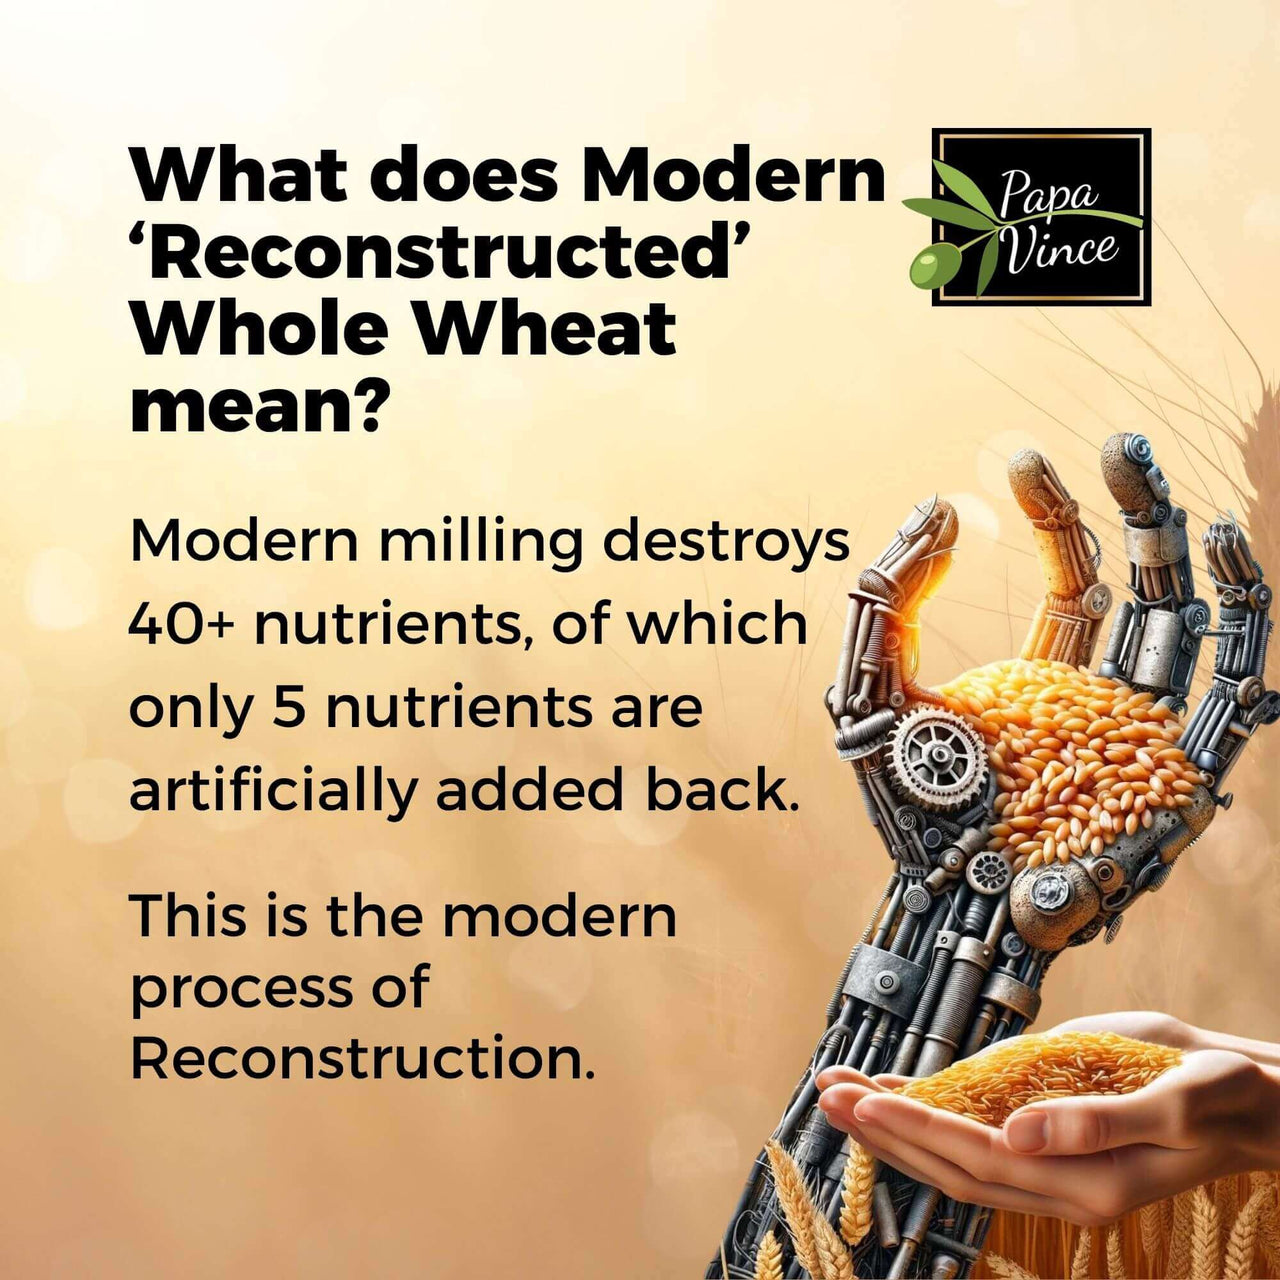 What does Modern ‘Reconstructed’ Whole Wheat mean? Modern milling destroys 40+ nutrients, of which only 5 nutrients are artificially added back. This is the modern process of Reconstruction.